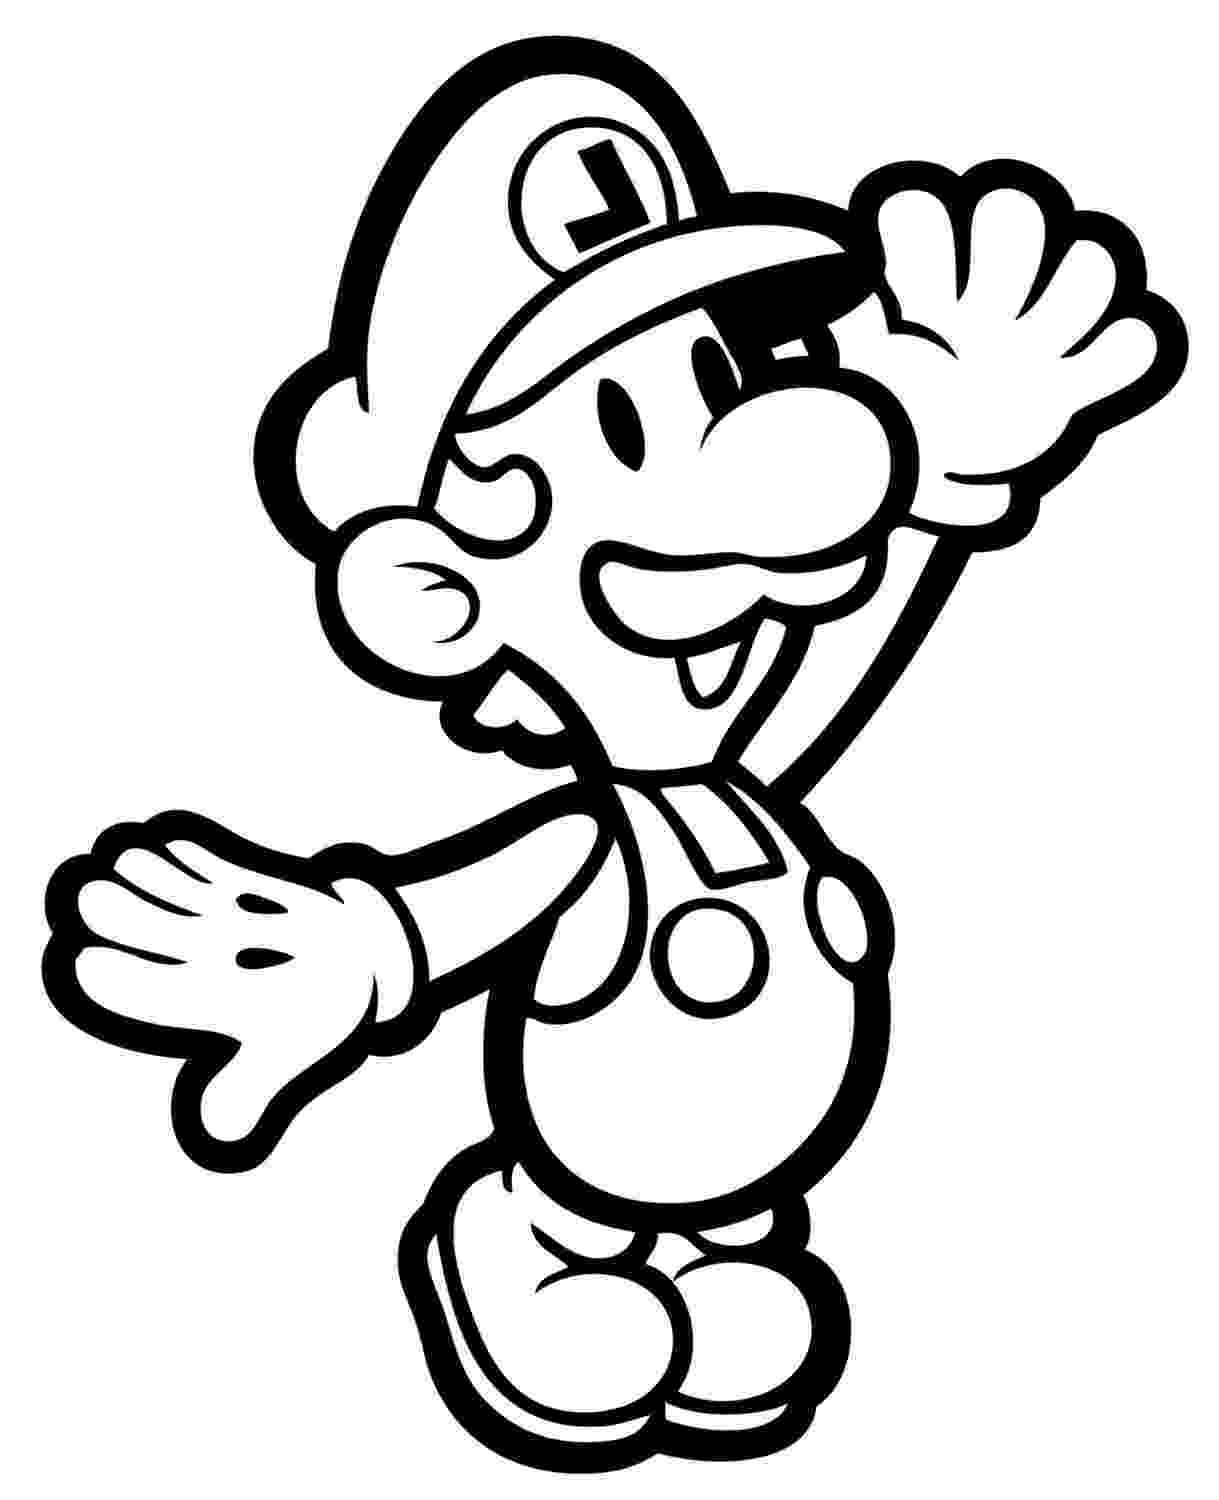 luigi coloring page luigi 2013 coloring pages for preschoolers coloring point coloring page luigi 